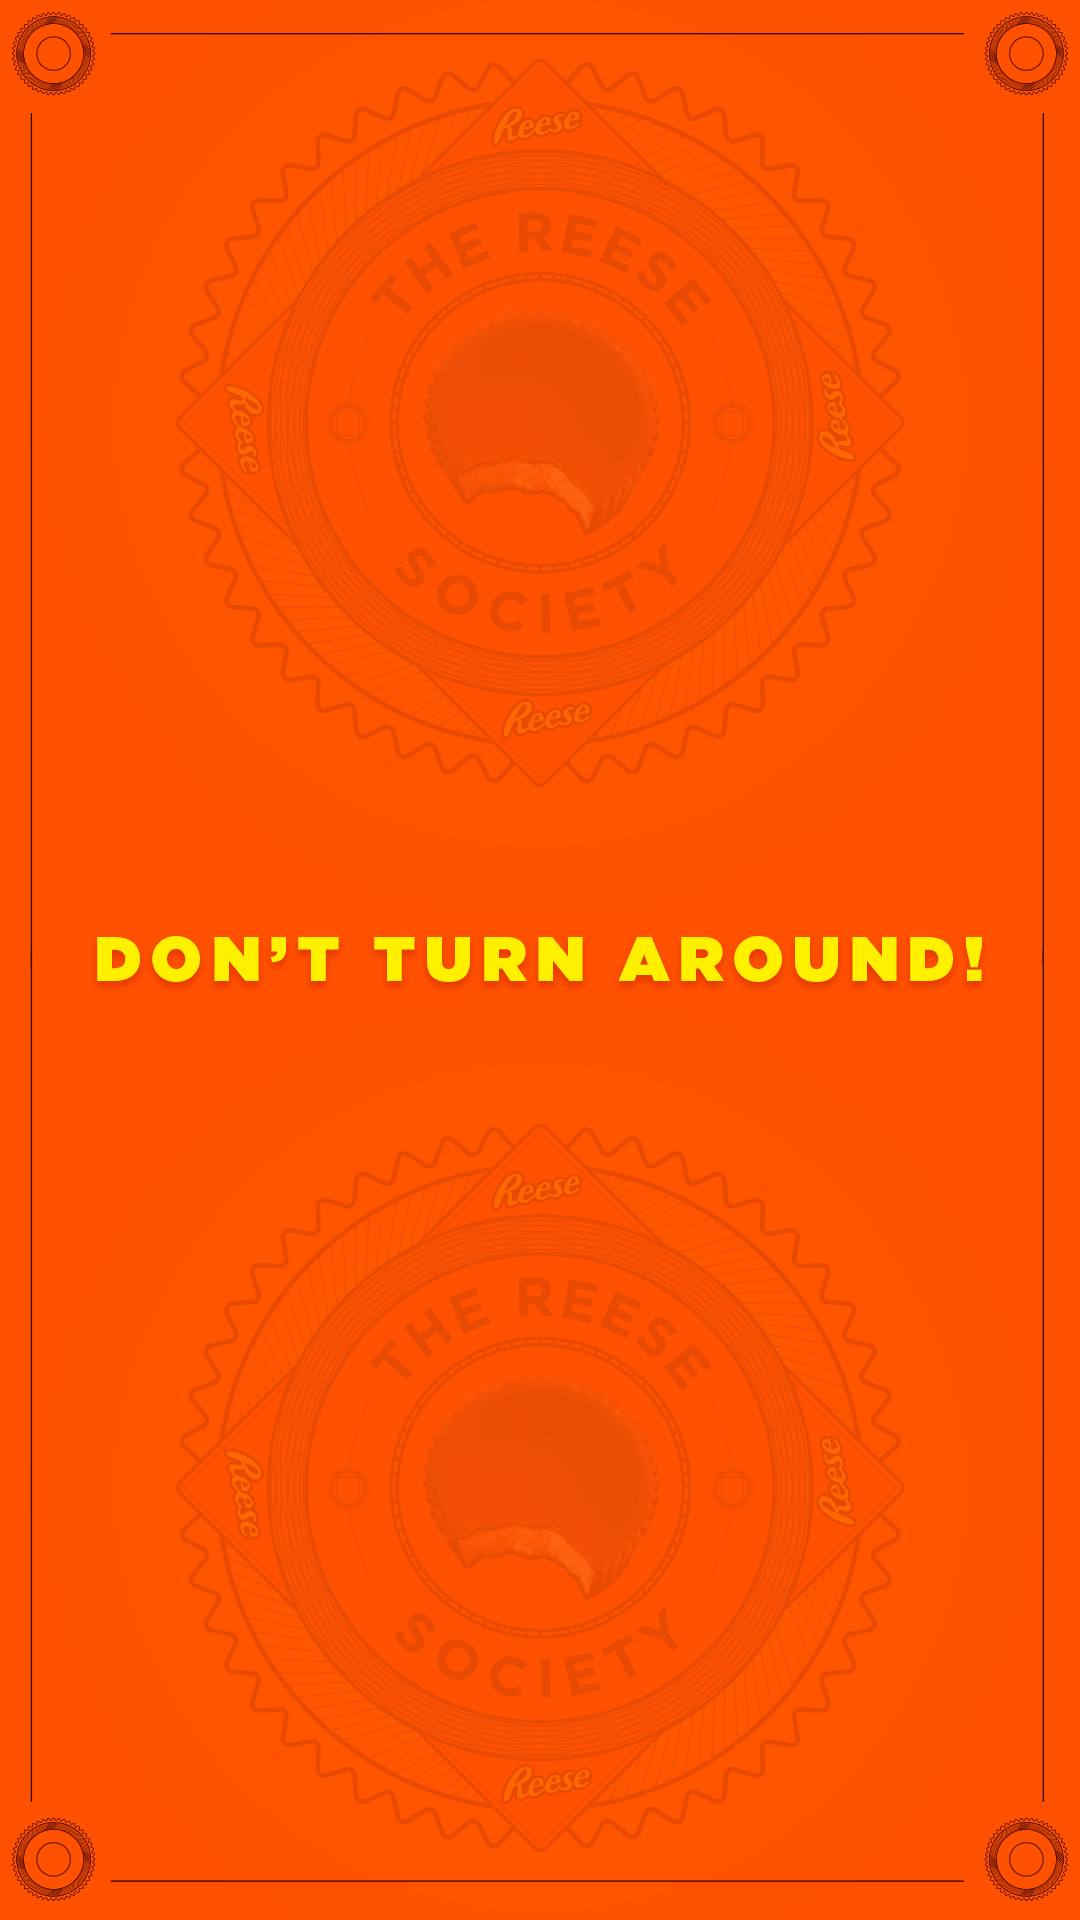 Reese-Society-IG_0094_Don’t-turn-around.png